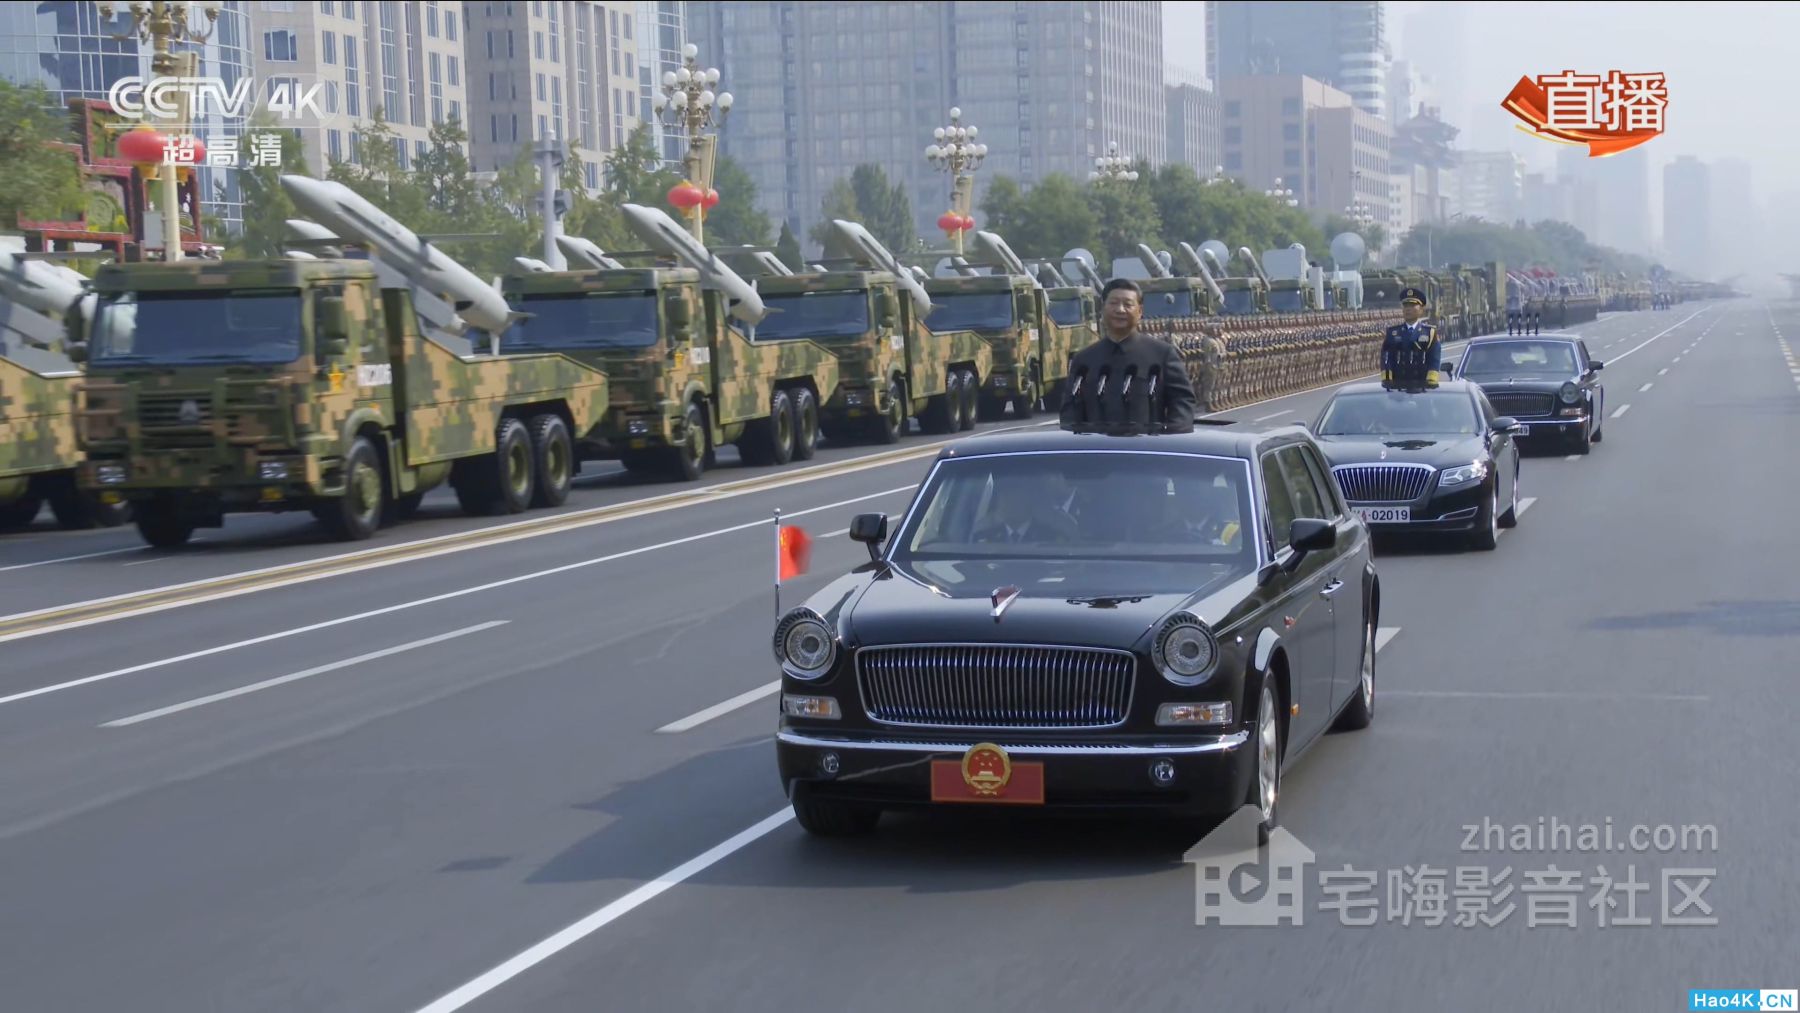 CCTV4K The 70th Anniversary Of The Founding Of The People's Republic of Chi.jpg